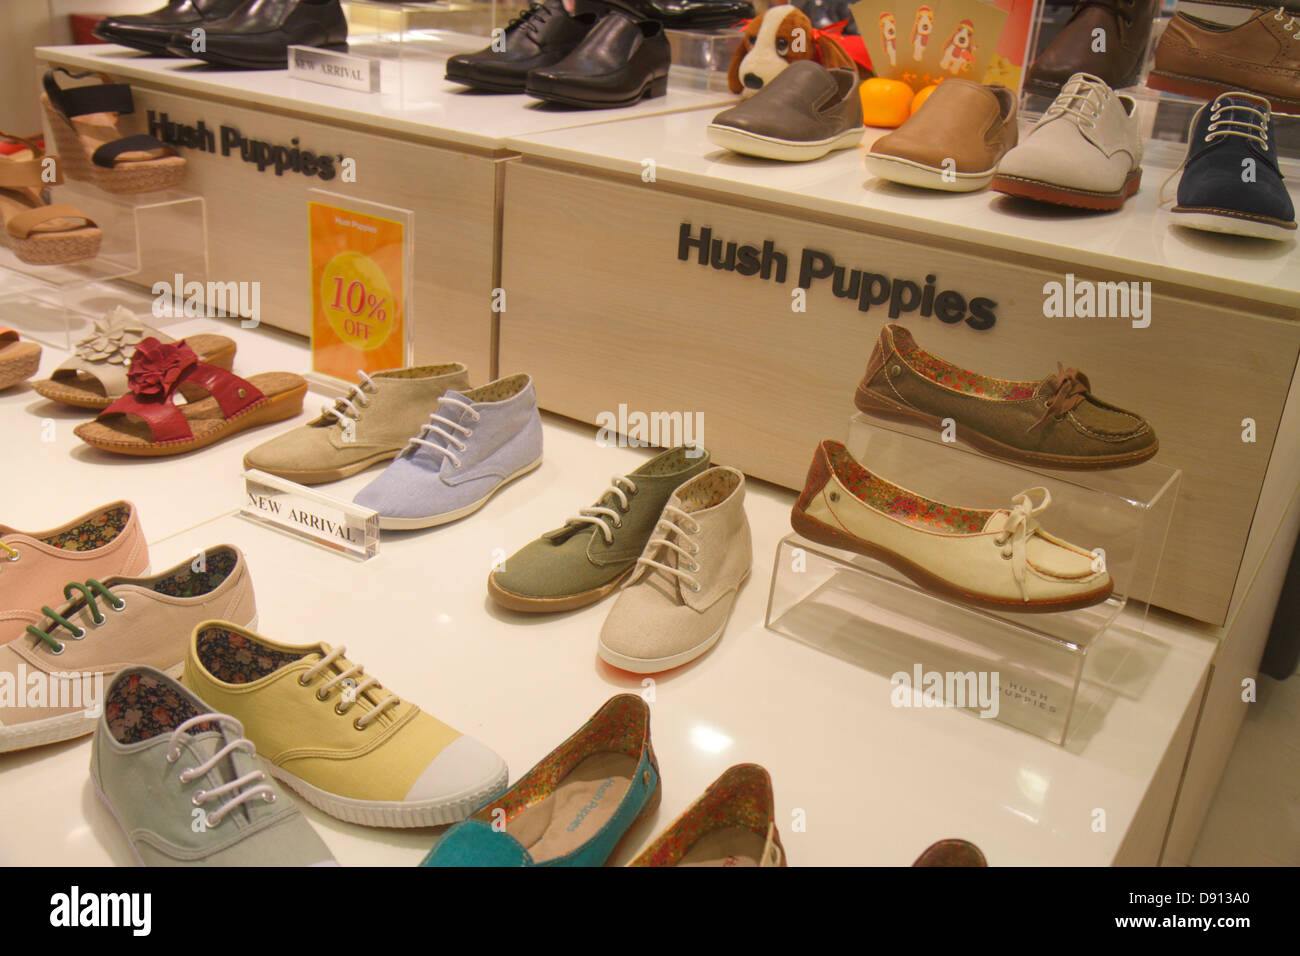 Hush Puppies Shoes High Resolution Stock Photography and Images - Alamy